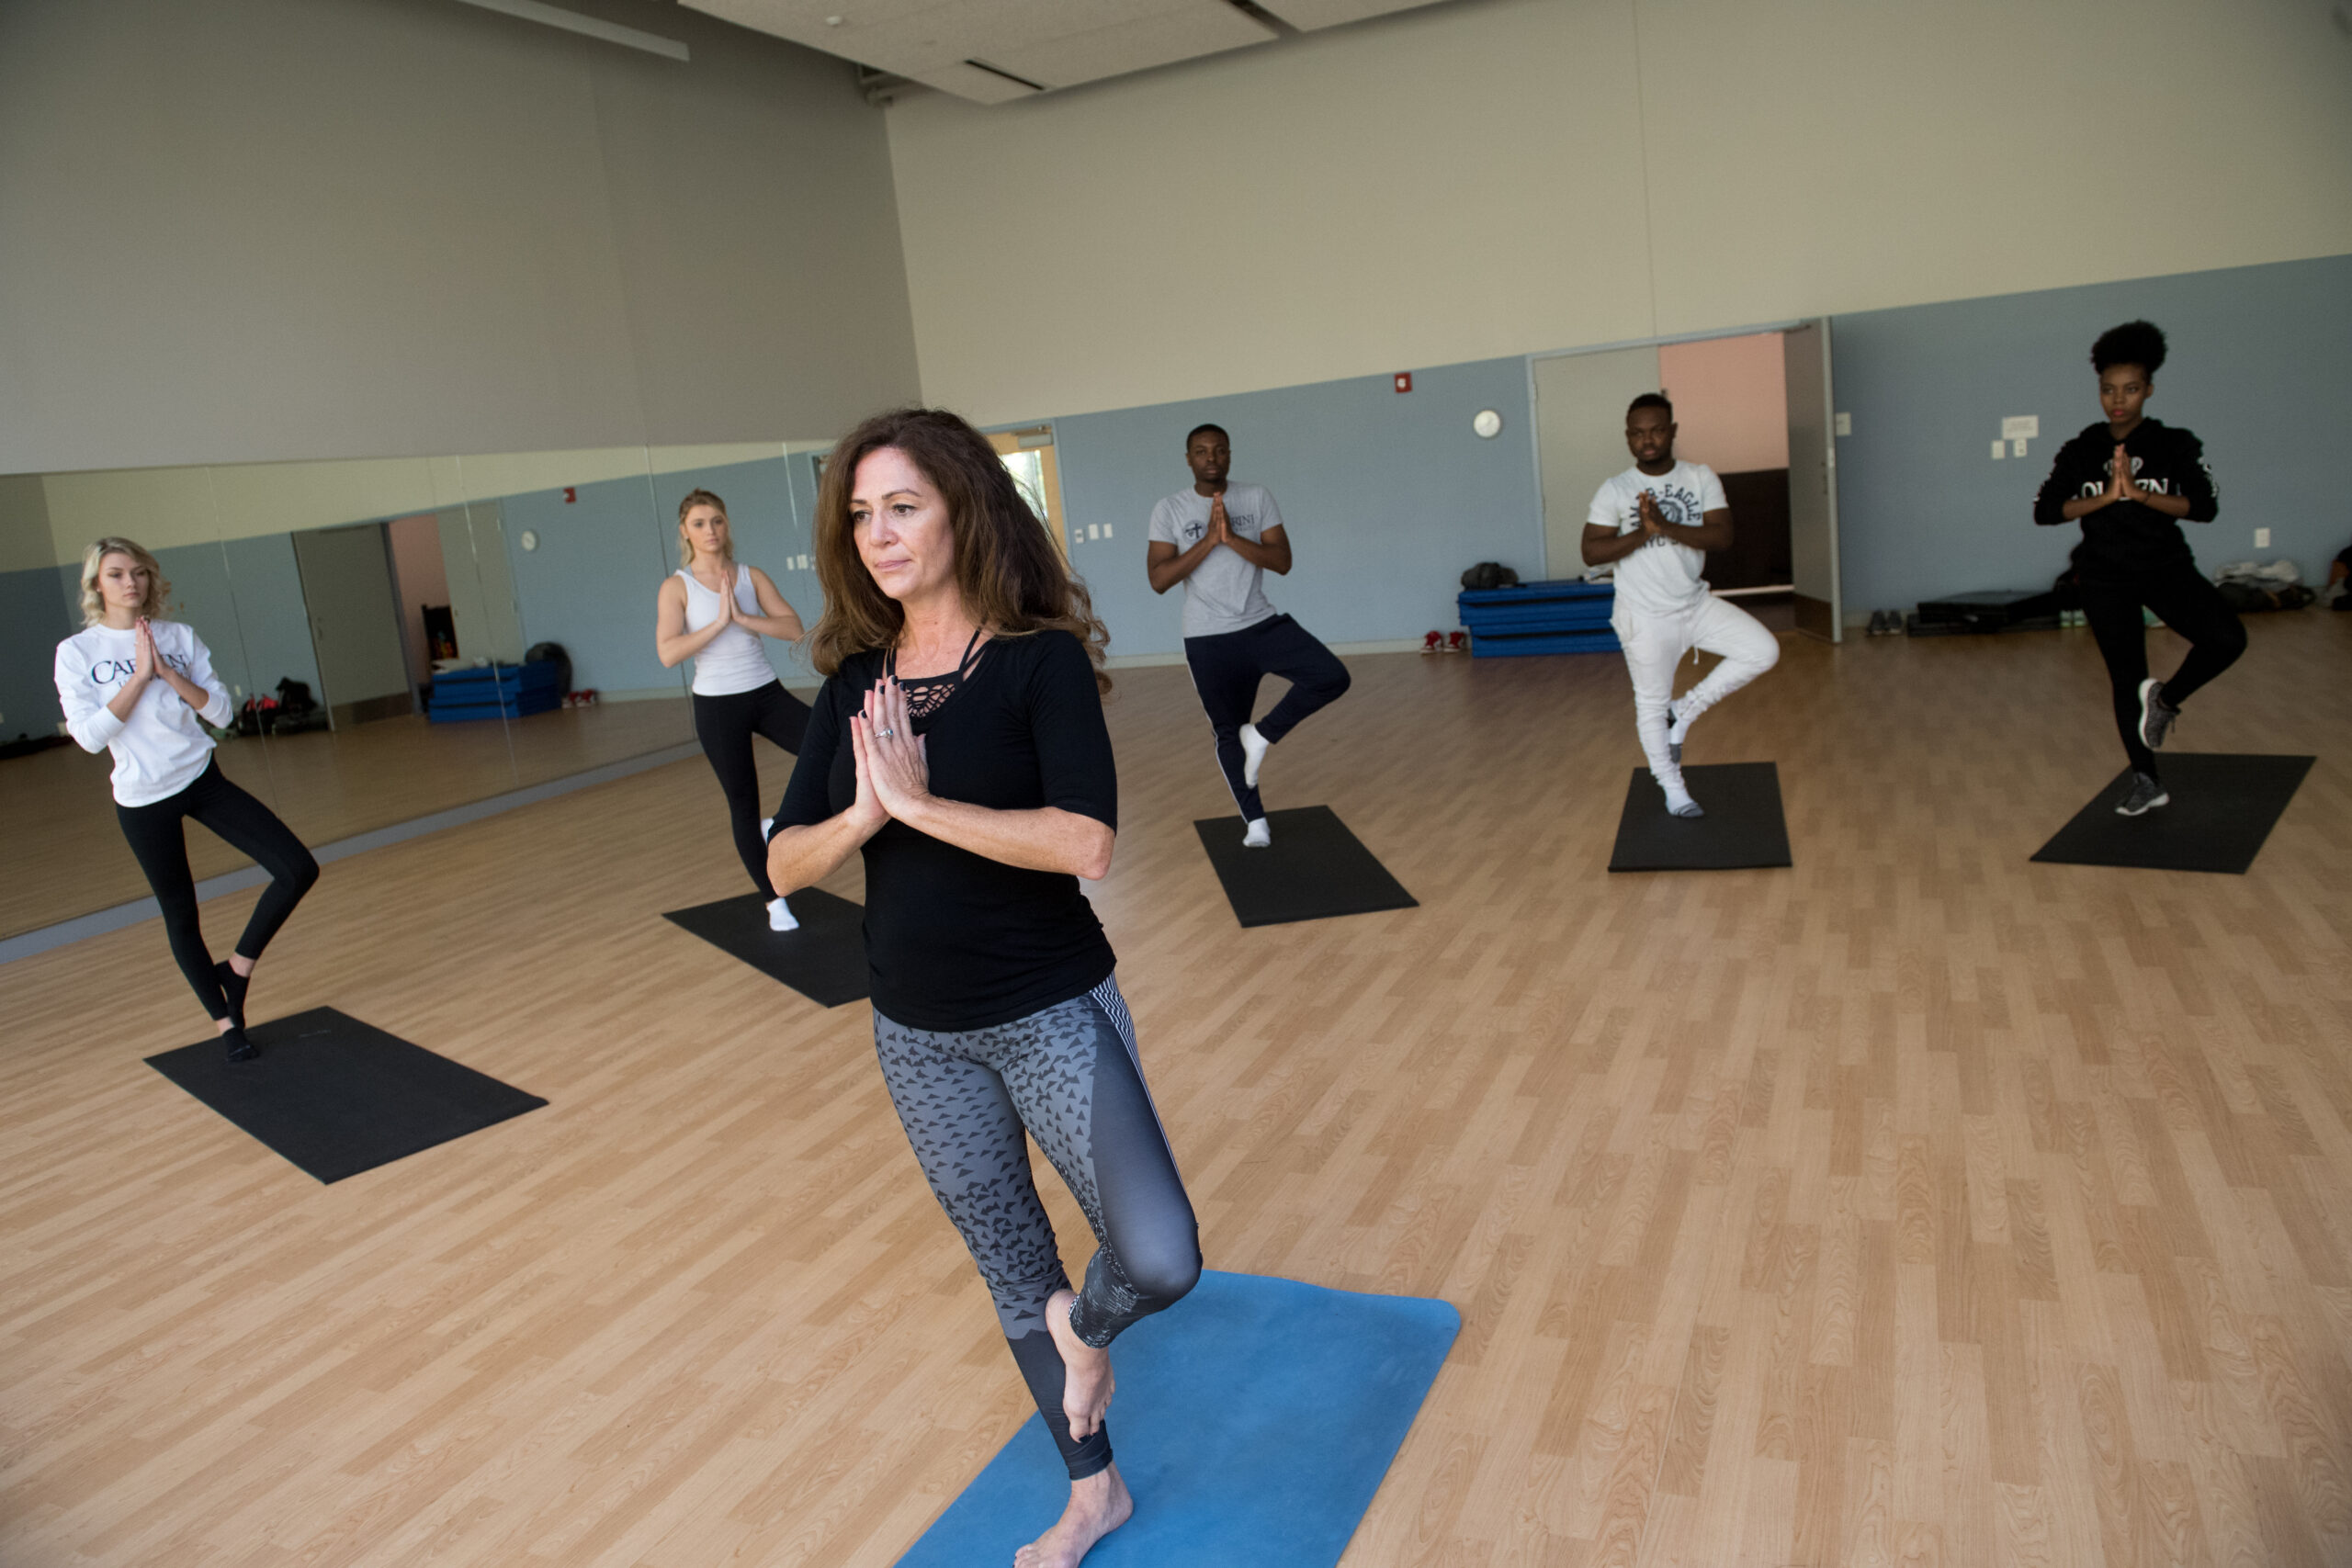 Besides academically rigorous accelerated courses, Cabrini offers some lighter, late-start courses, such as a yoga course that includes the culture and history behind the discipline.